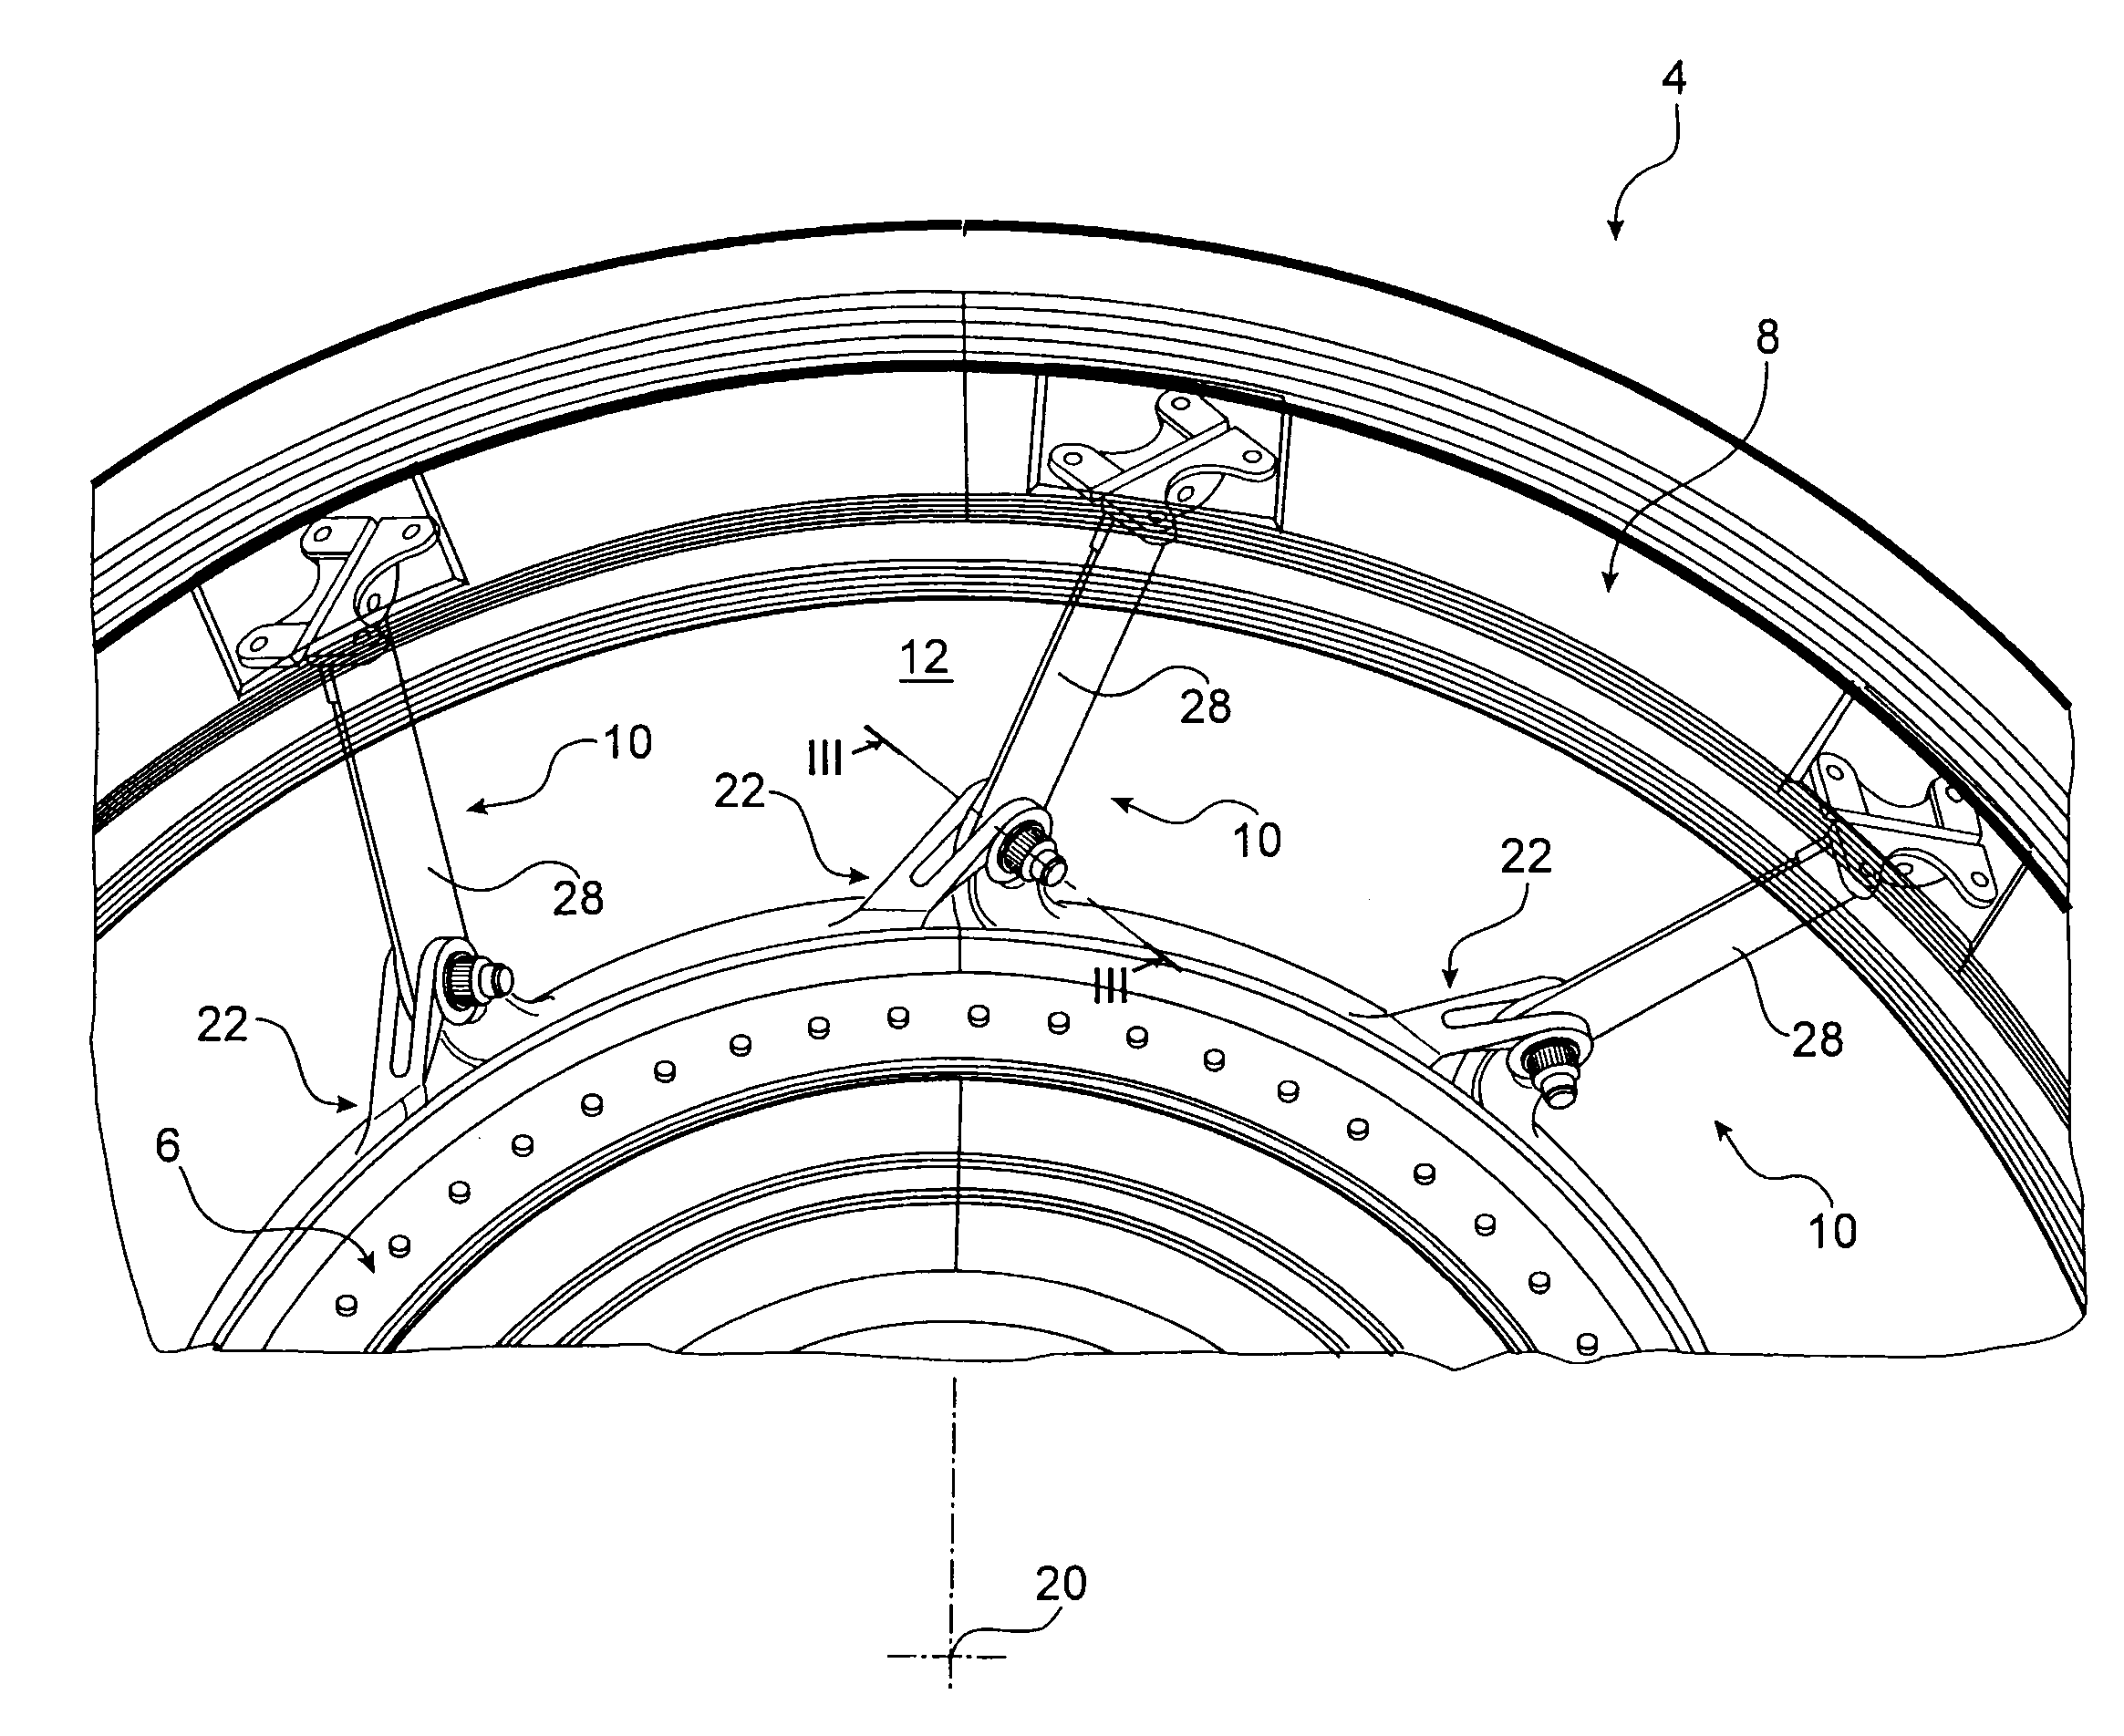 Joining device for joining two assemblies, for example for a stator of a turbomachine